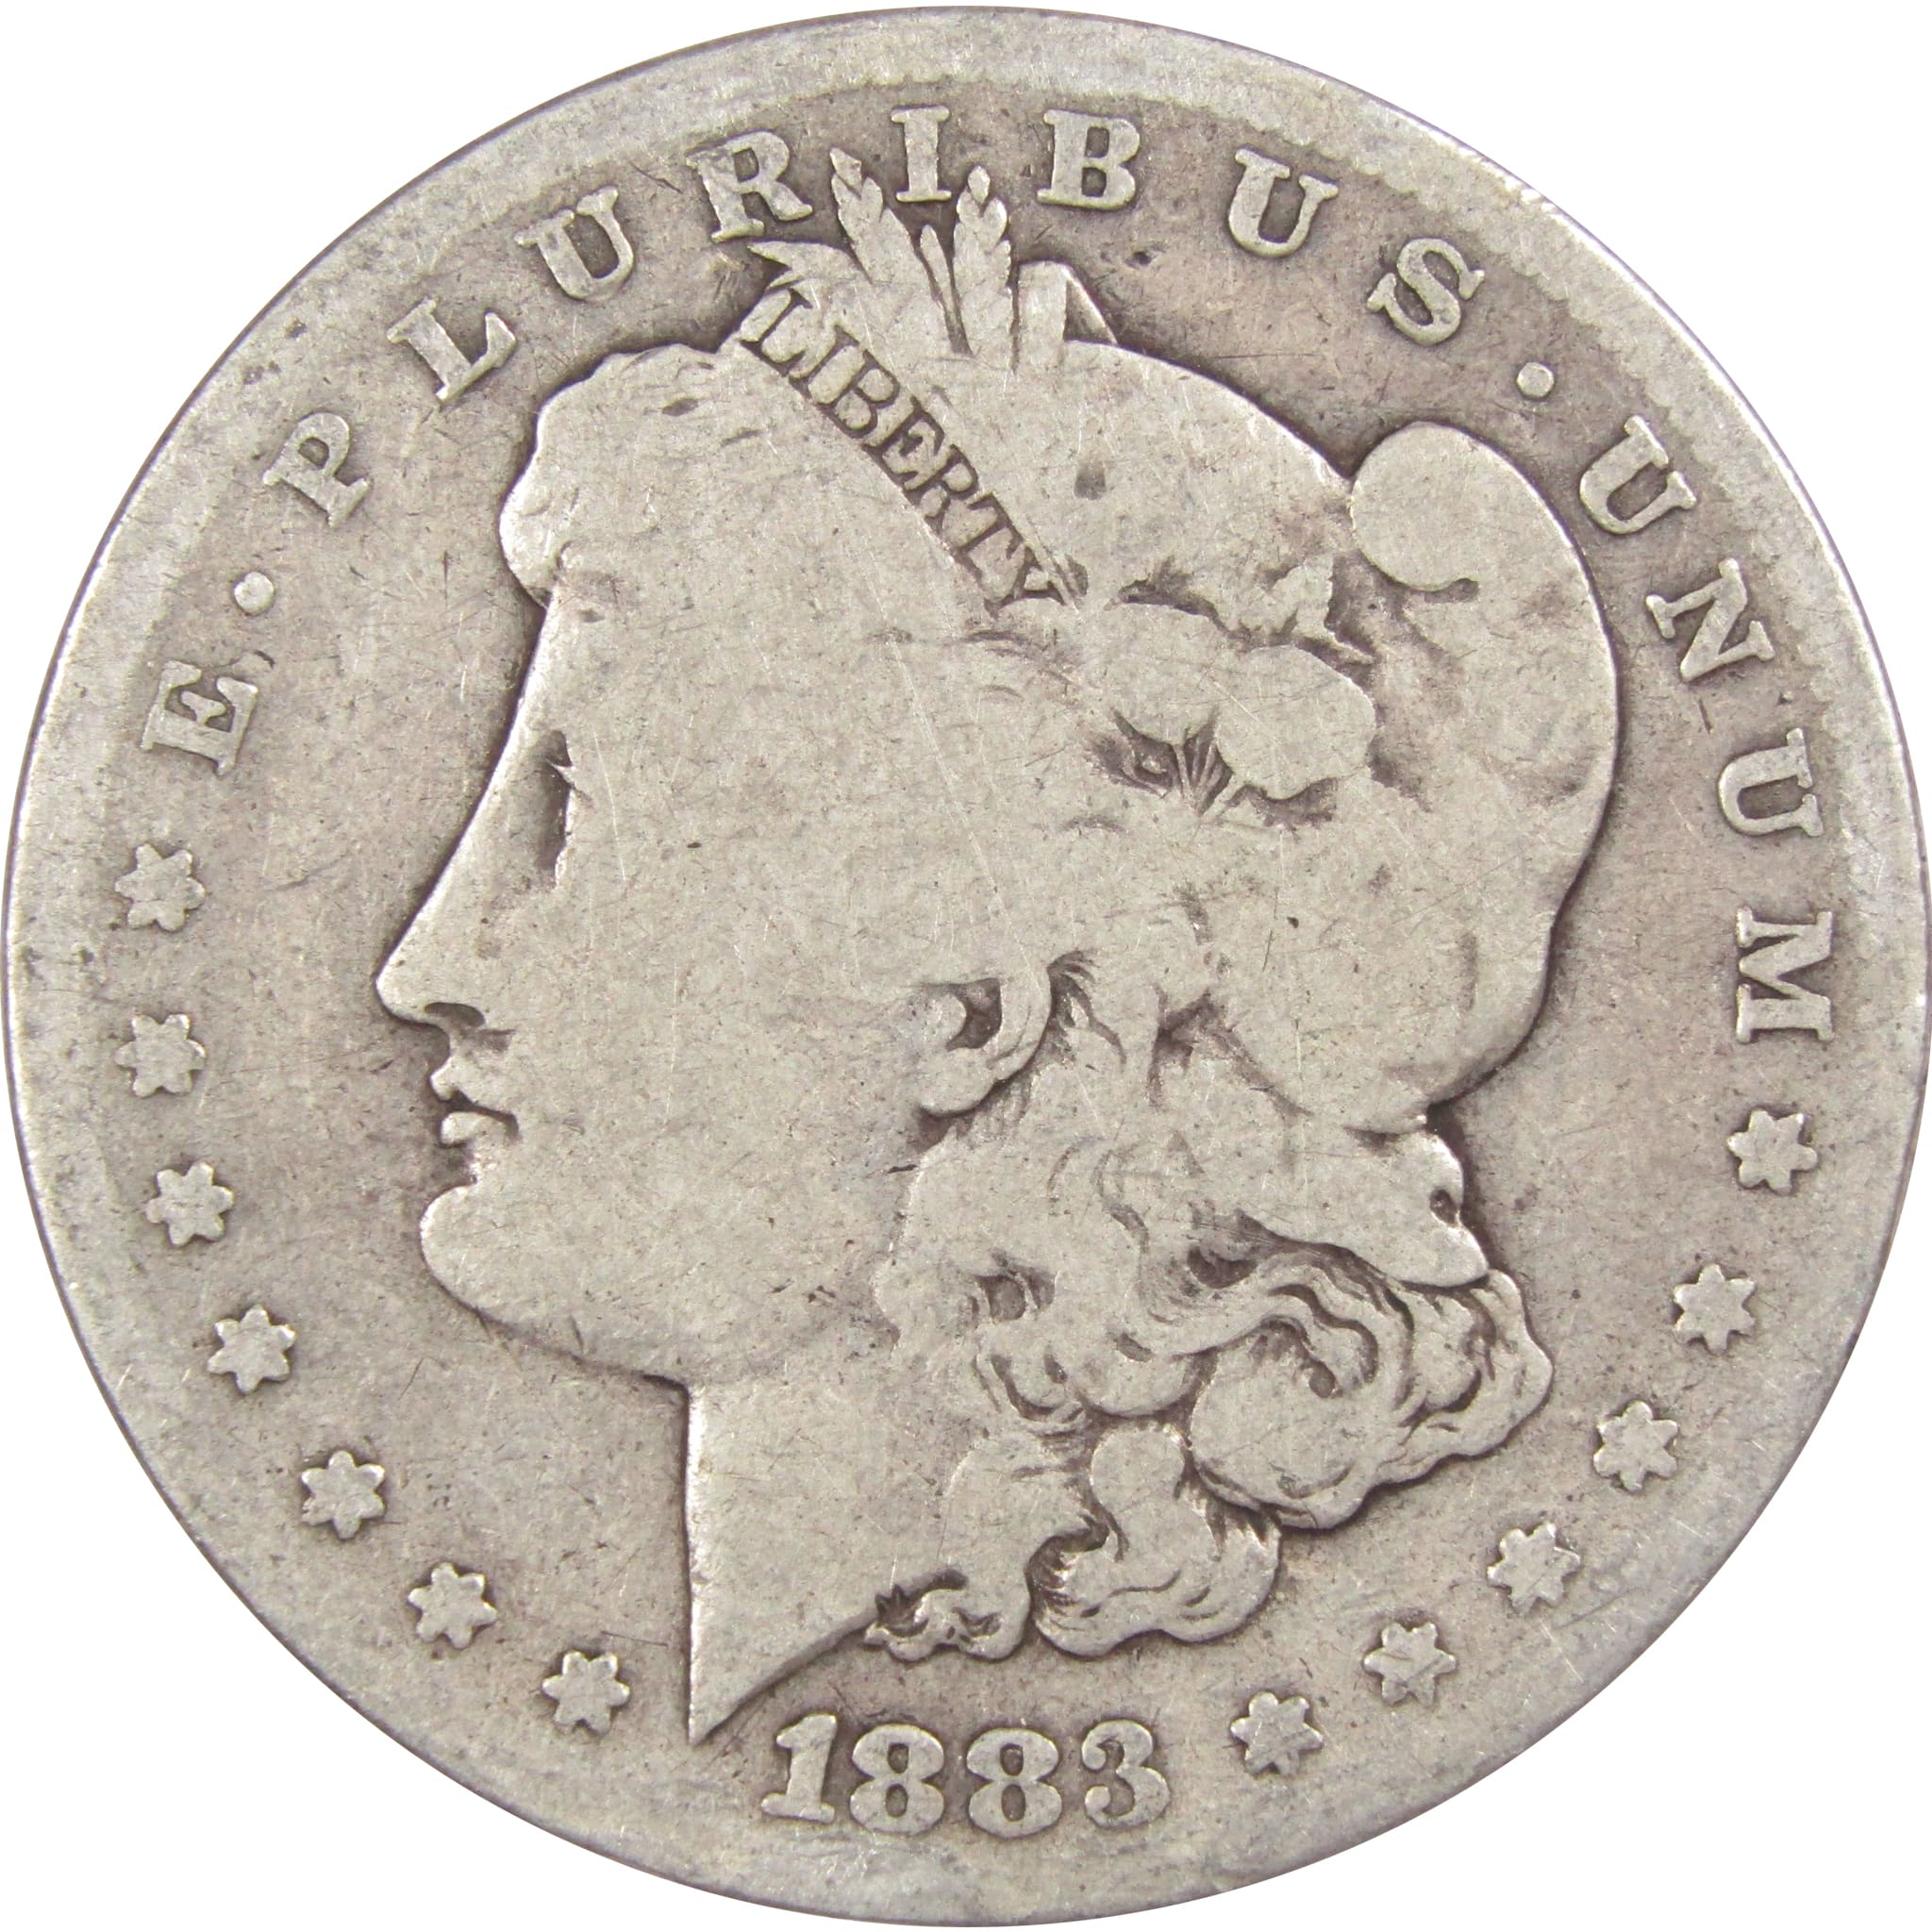 1883 S Morgan Dollar AG About Good 90% Silver US Coin SKU:IPC7453 - Morgan coin - Morgan silver dollar - Morgan silver dollar for sale - Profile Coins &amp; Collectibles